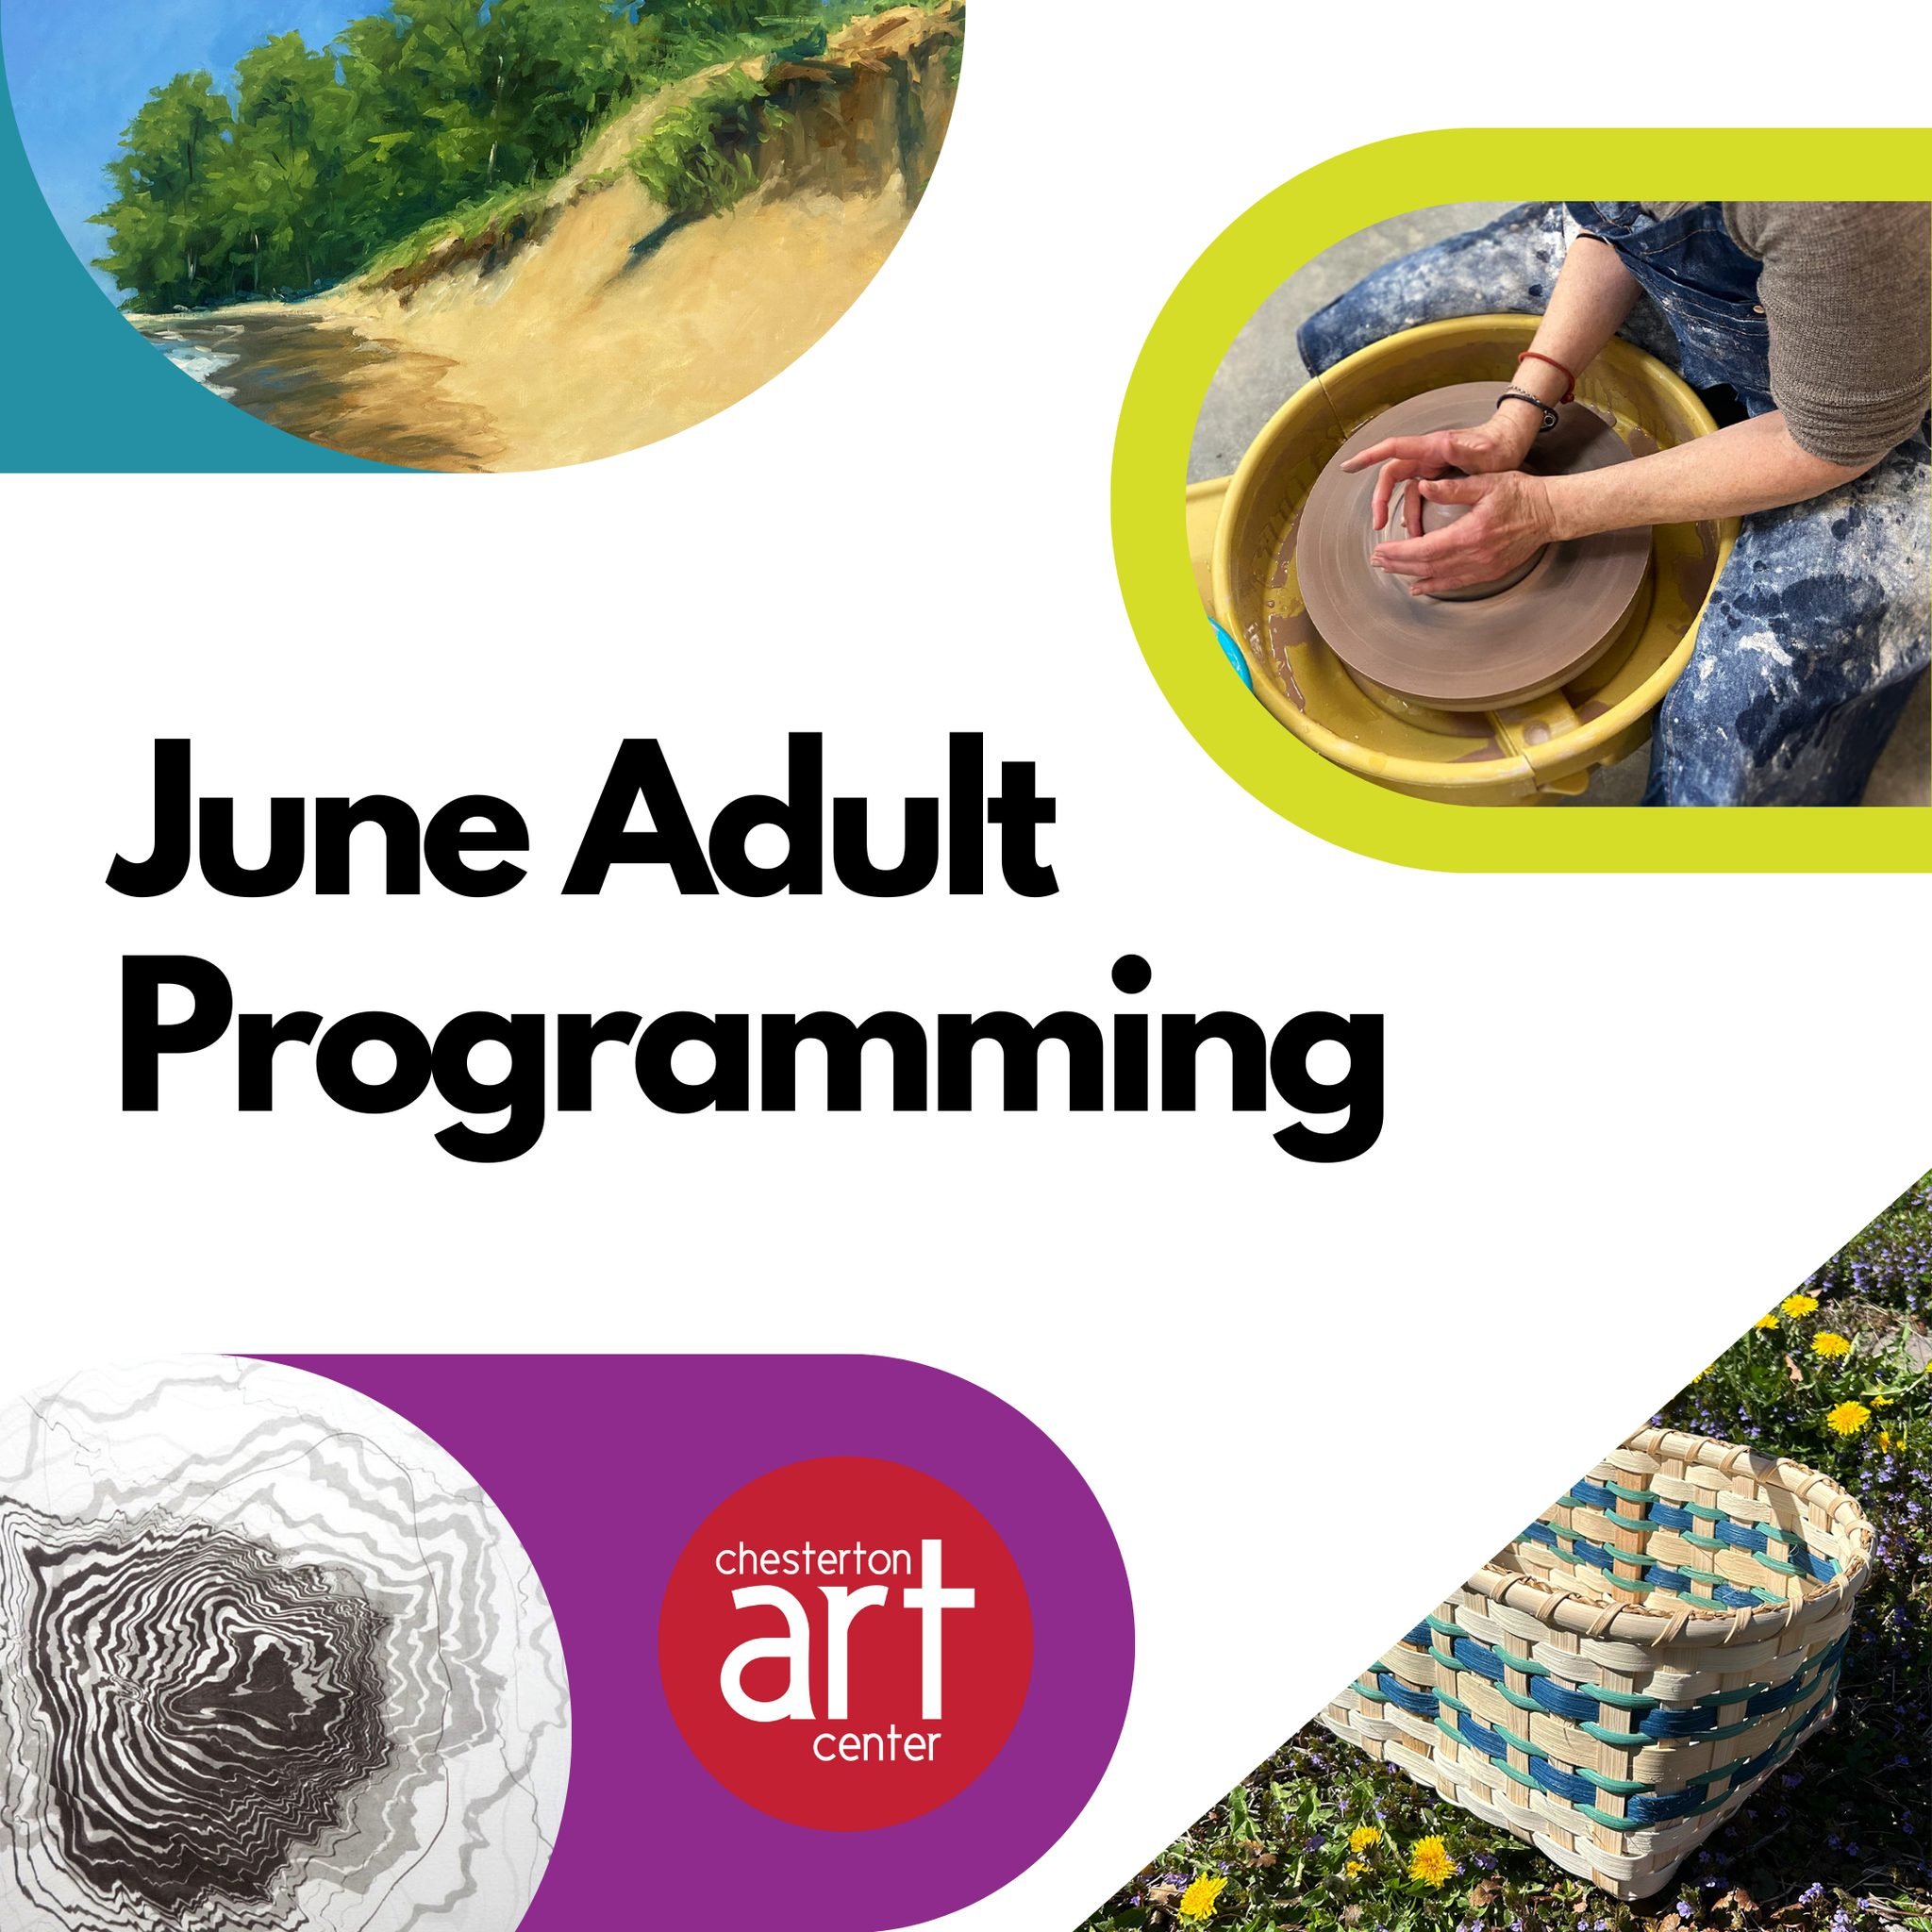 It's time to make the leap and learn something NEW this June! Make art a priority this month, we hope to see you there.

🟣 For more information and registration, visit www.chestertonart.org/adult-classes-and-workshops, call our office at (219) 926-4